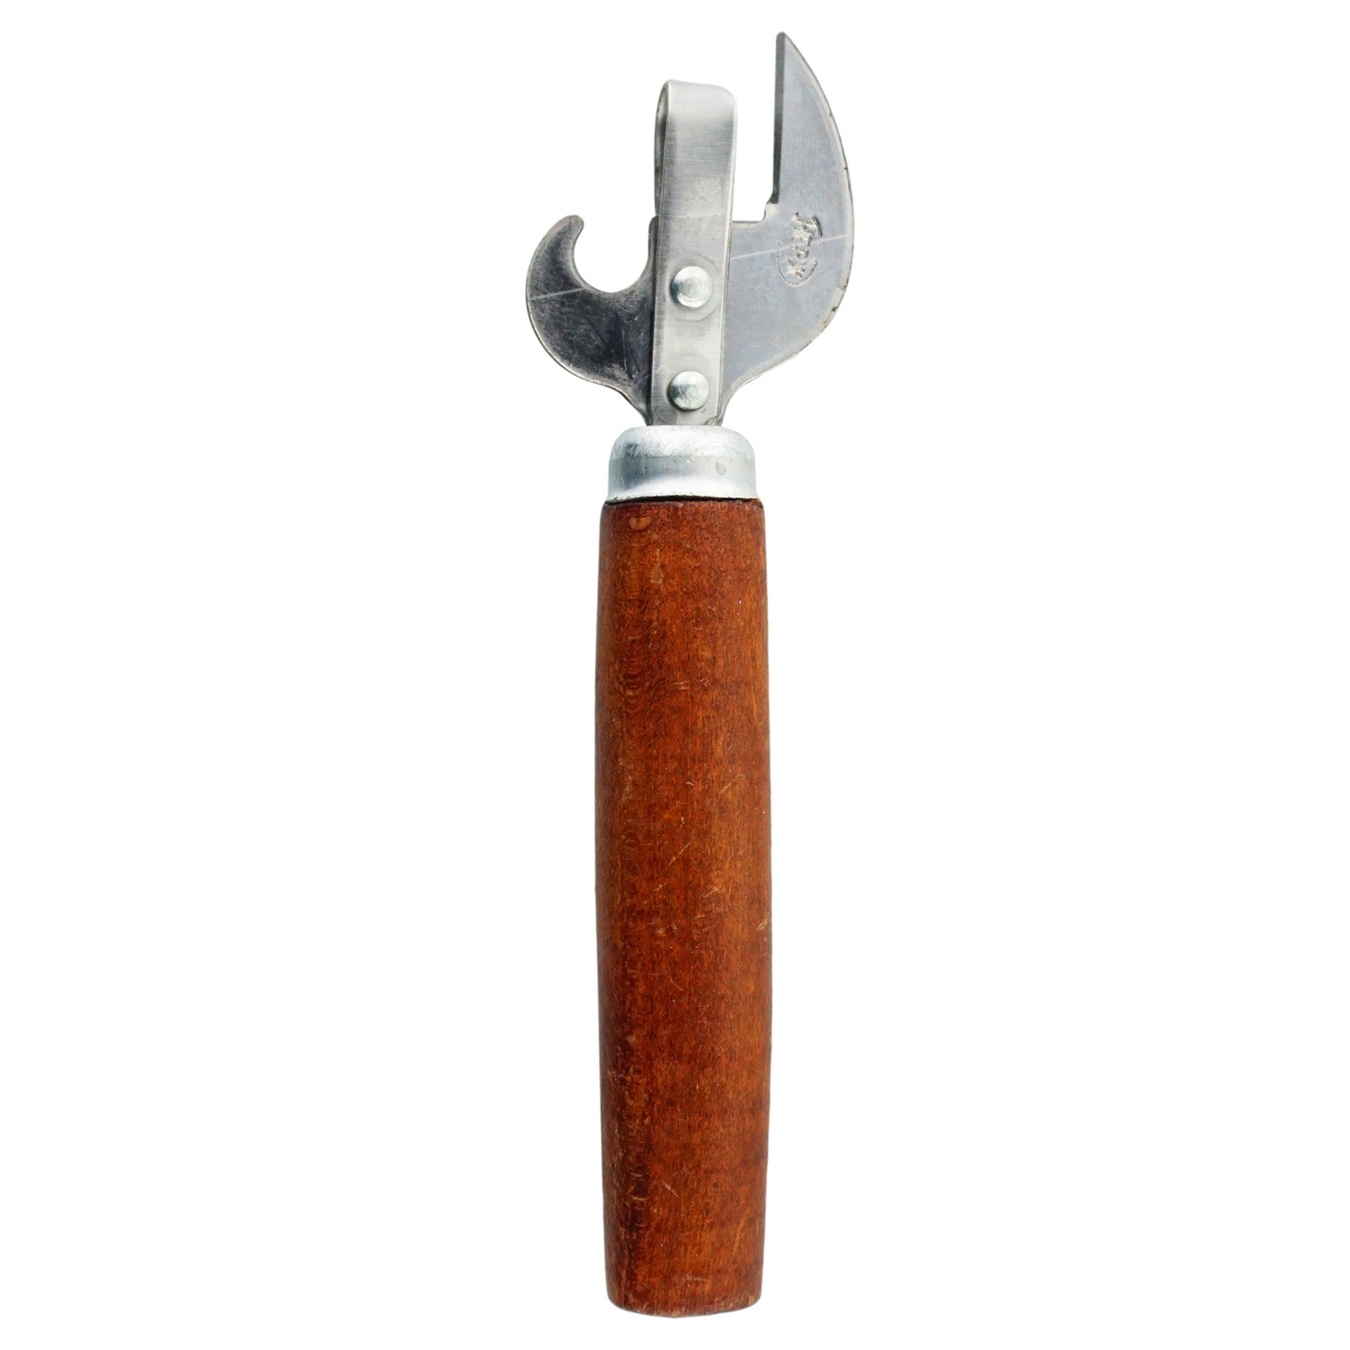 Opener with a wooden handle